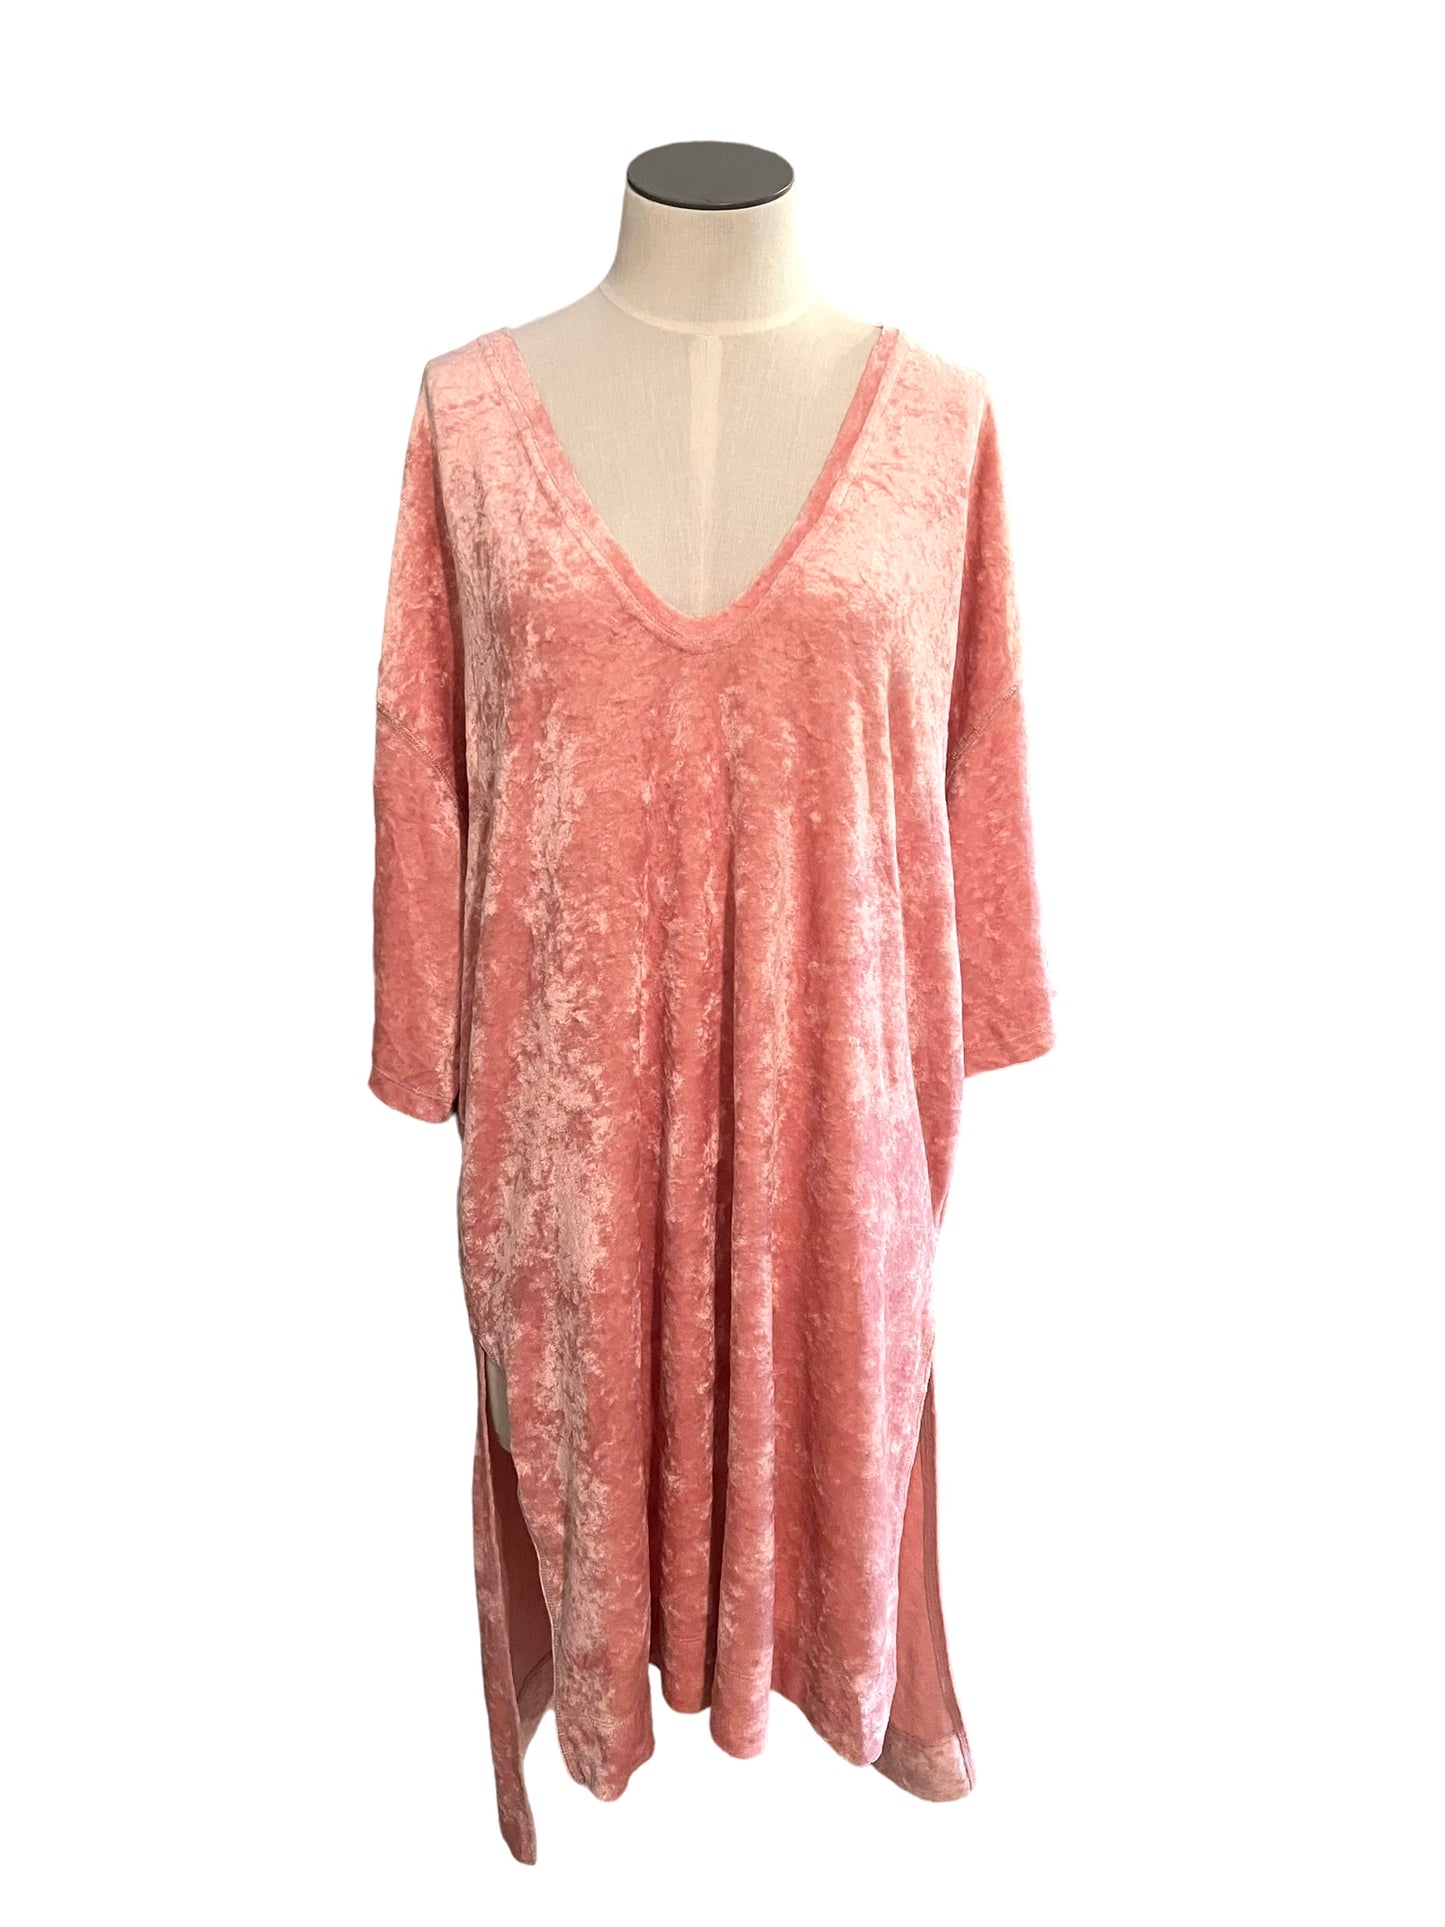 Free People Size S Passion Flower Crushed Velvet Tunic